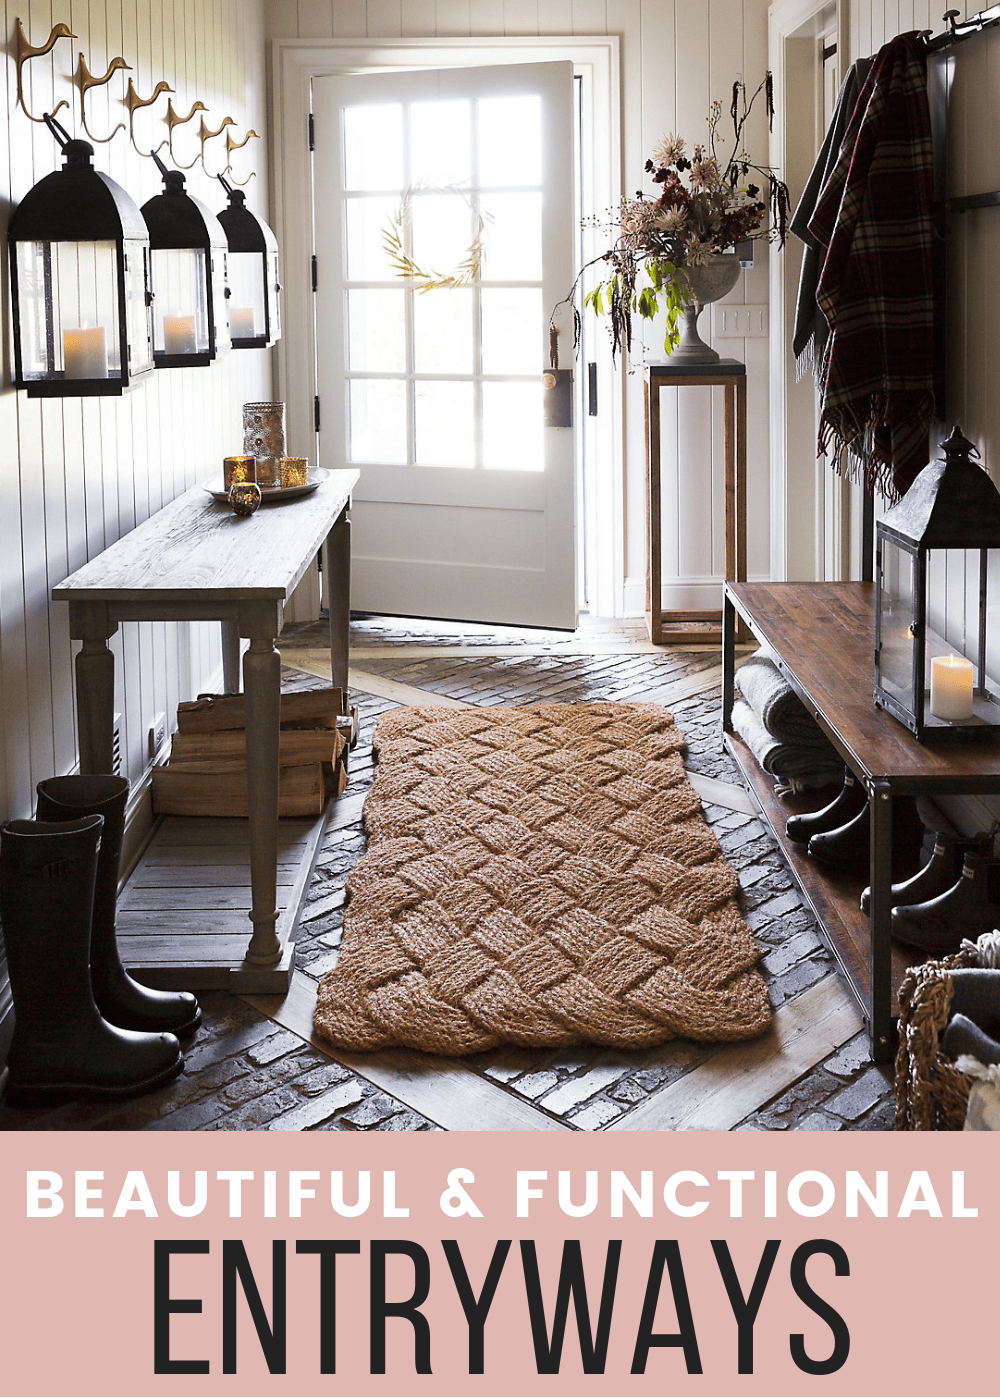 12 beautiful and functional entryways to inspire you to tackle your own!